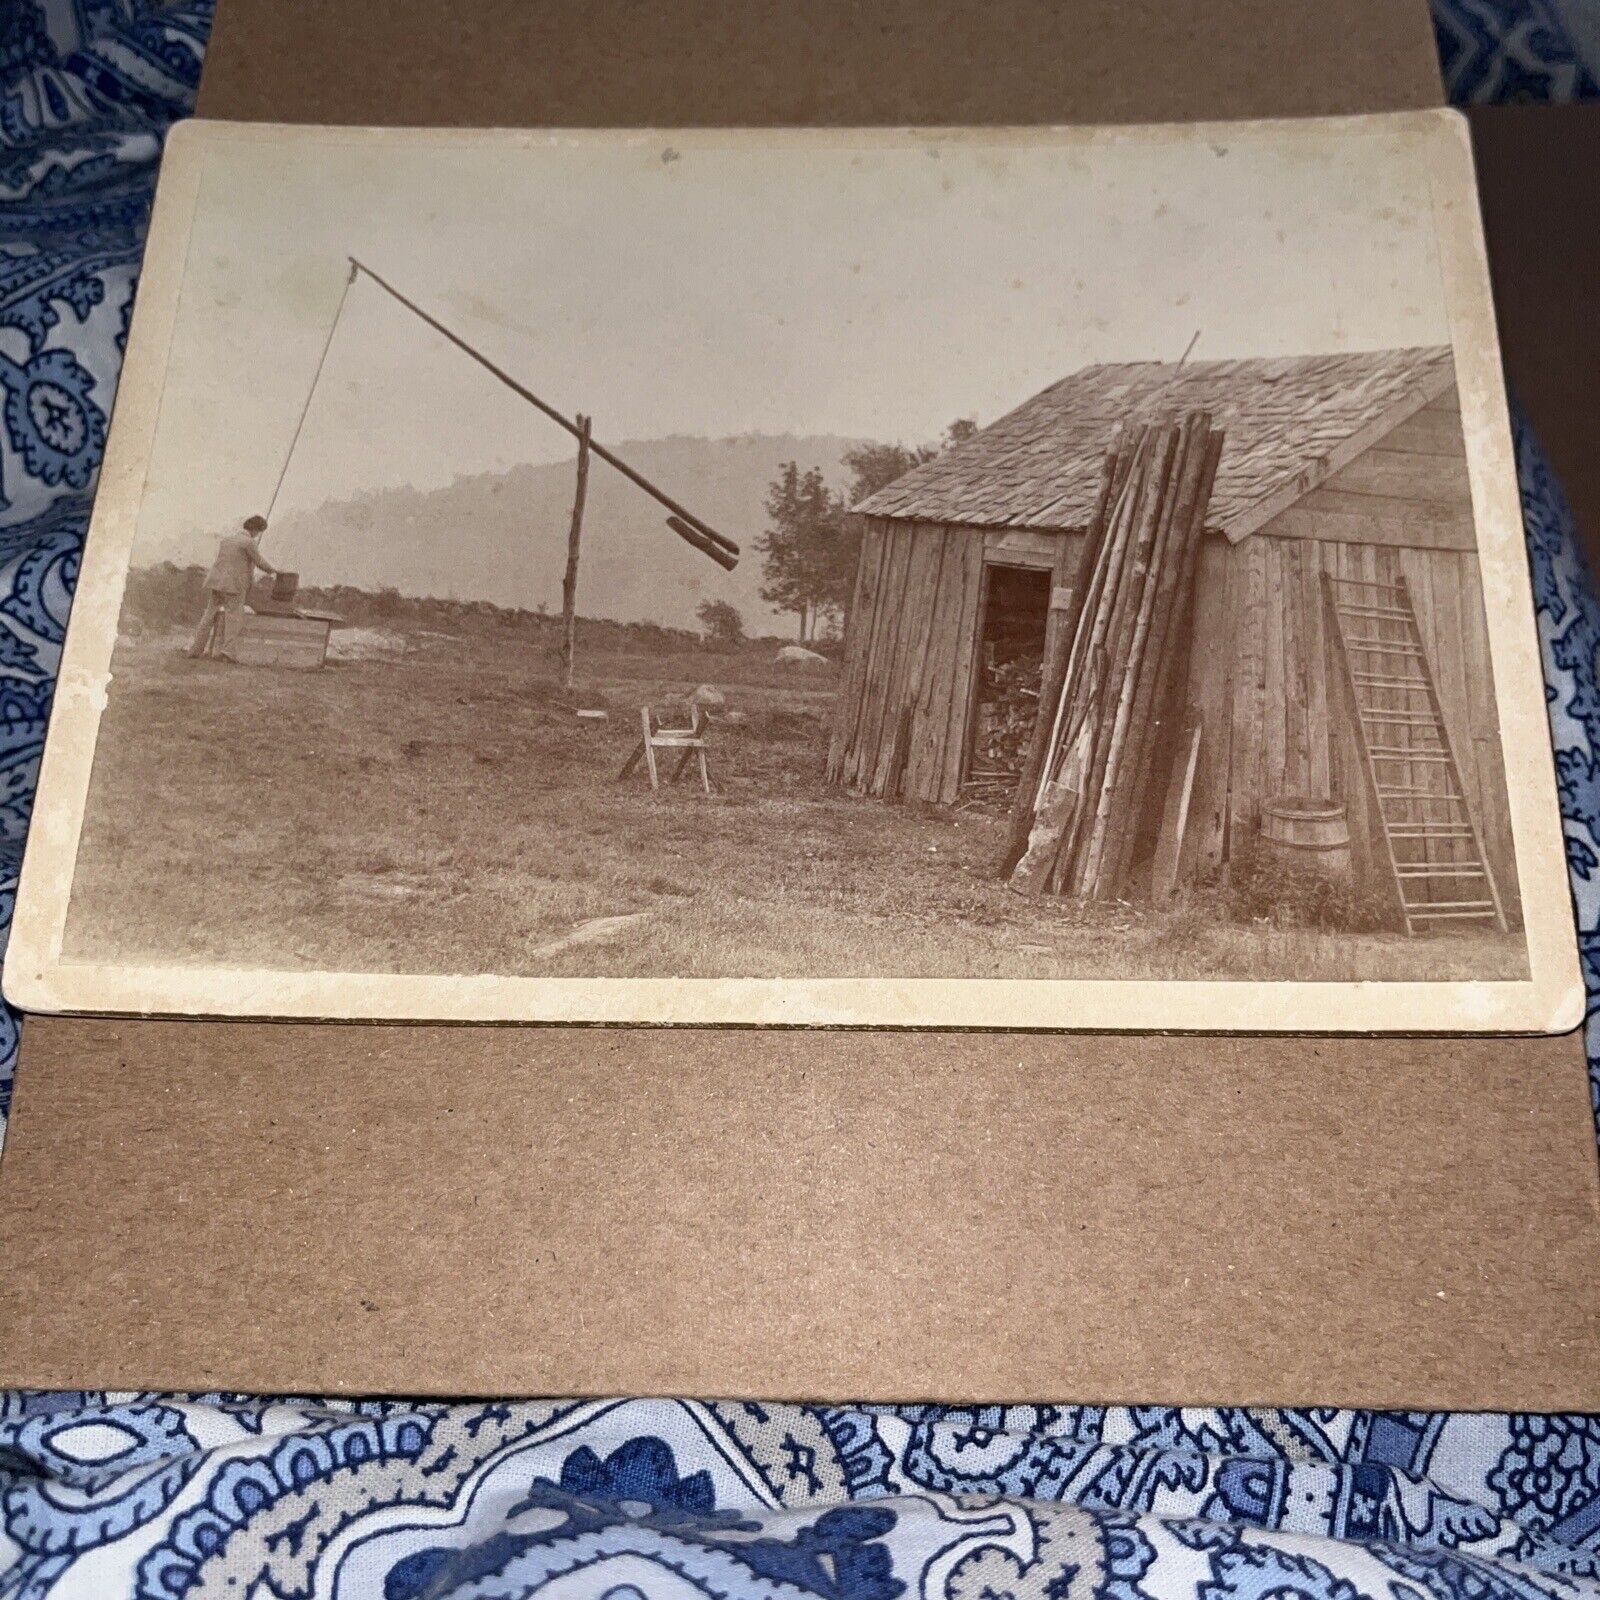 Antique Cabinet Card Photo: Early Irrigation Apparatus / Shadoof Next to Cabin